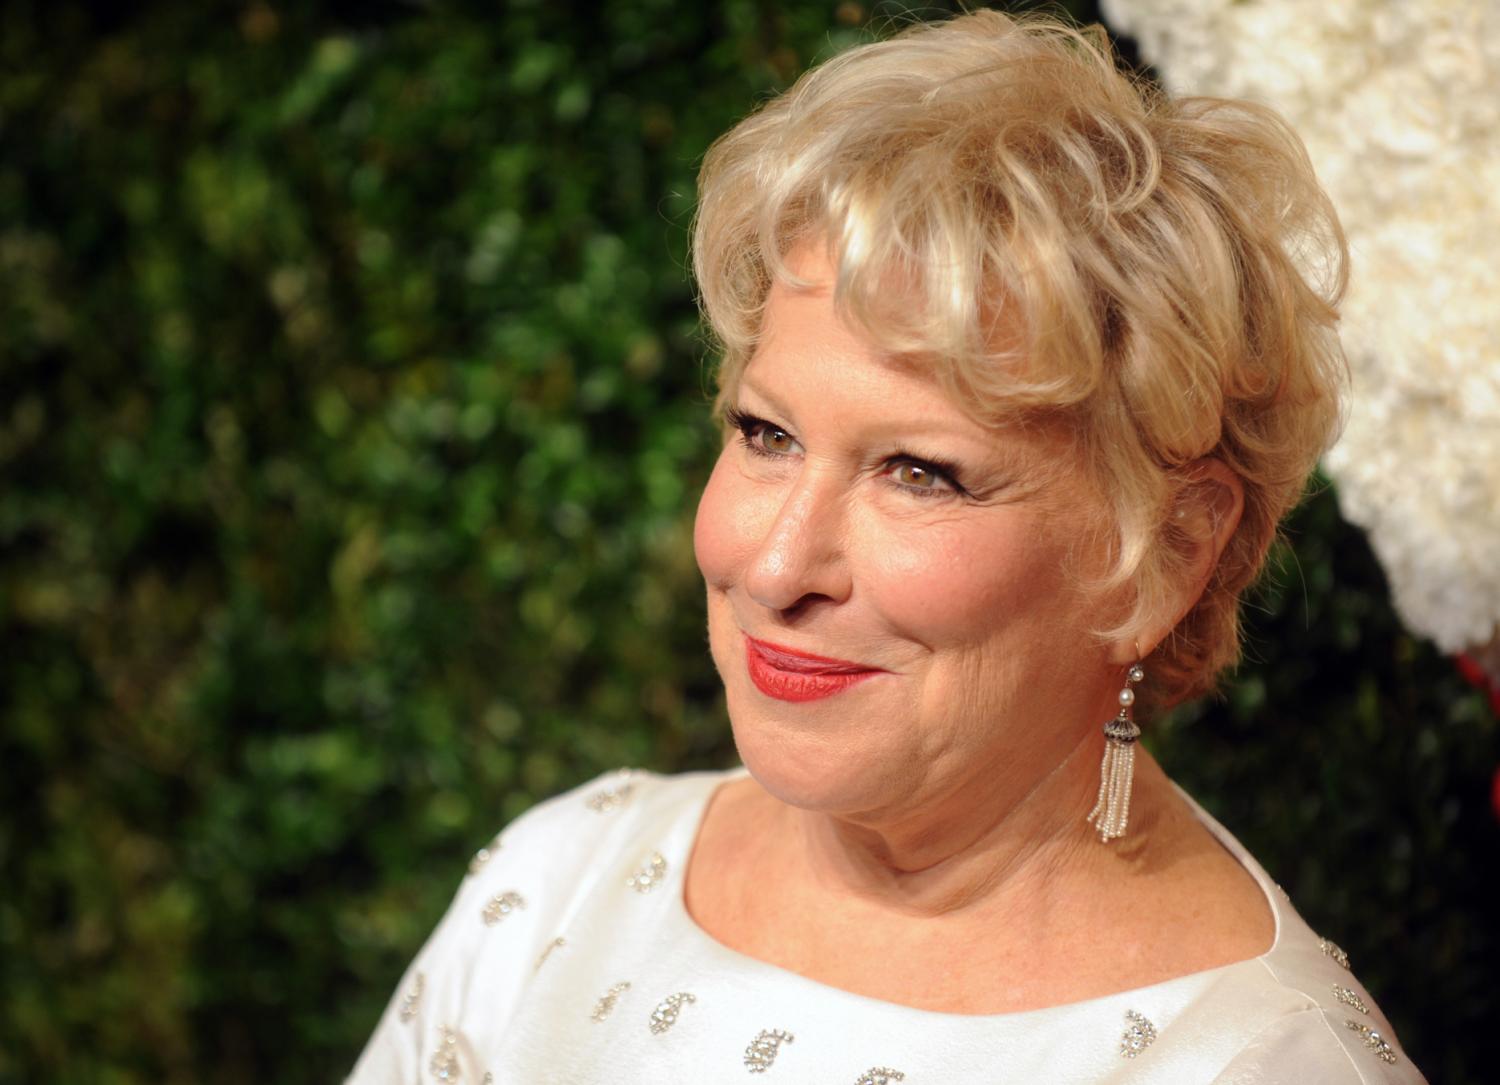 More Pictures Of Bette Midler. 